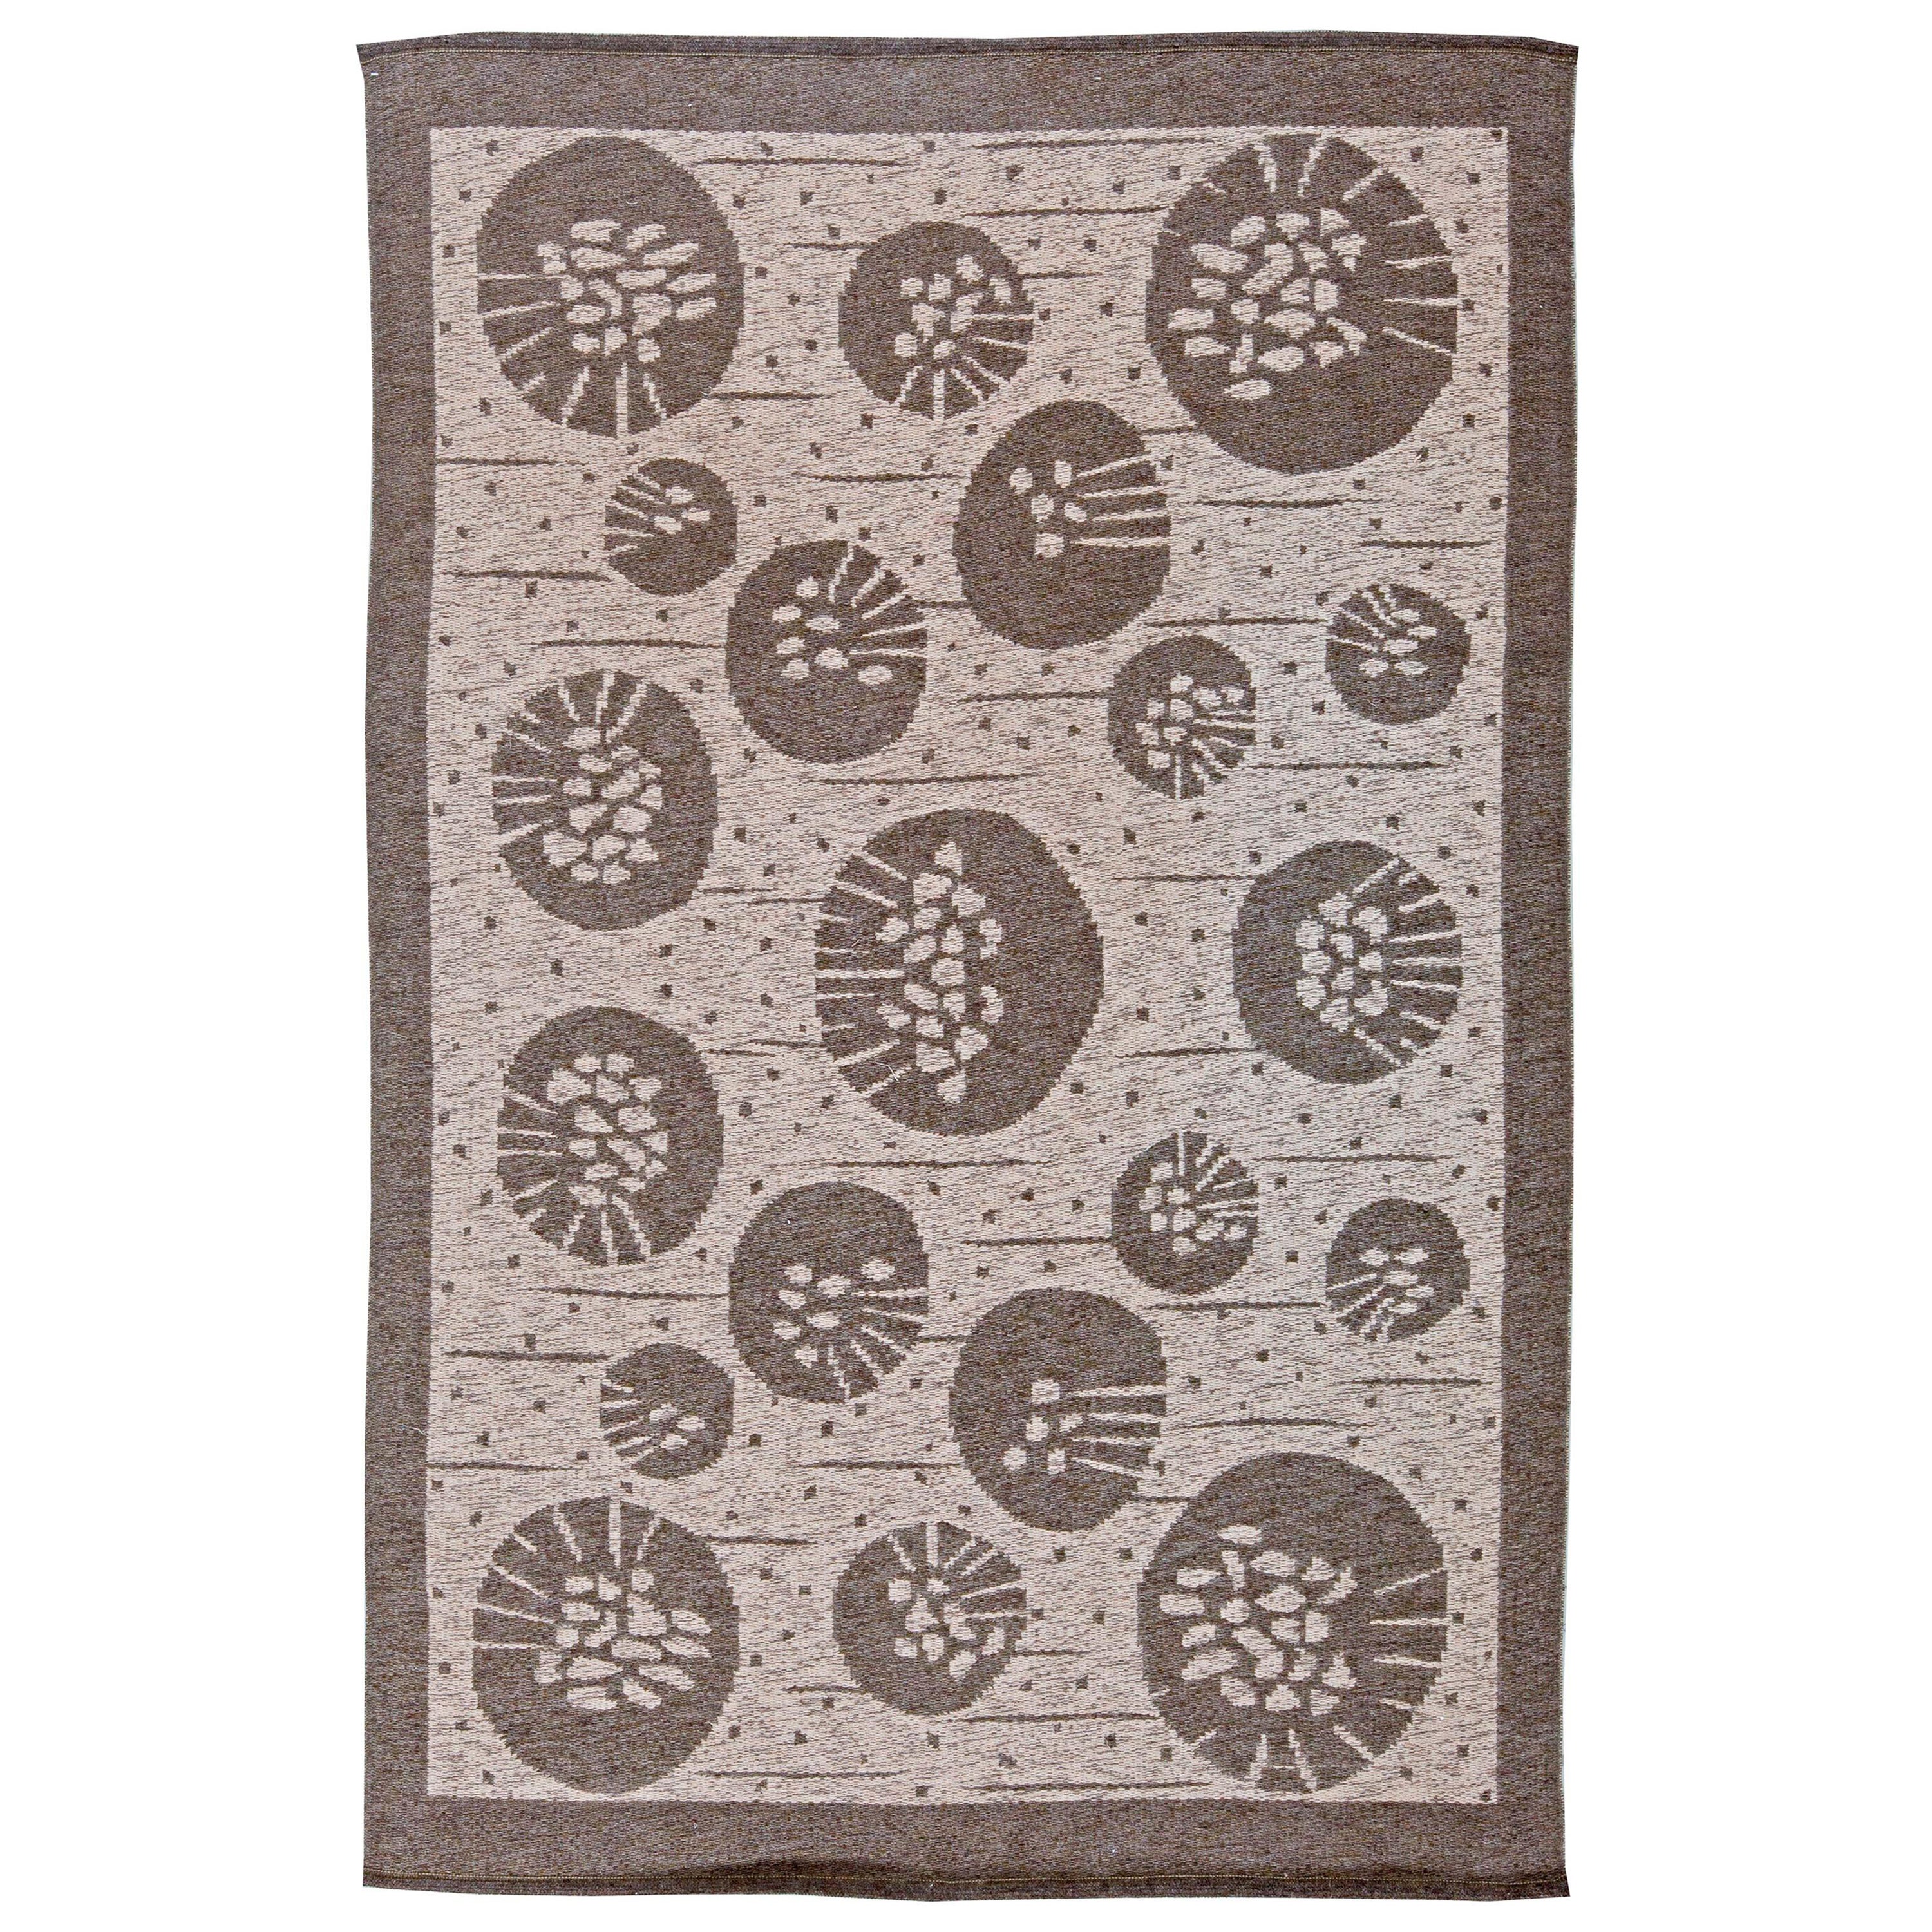 Midcentury Double Sided Swedish Flat-Weave Wool Rug by Orsa For Sale